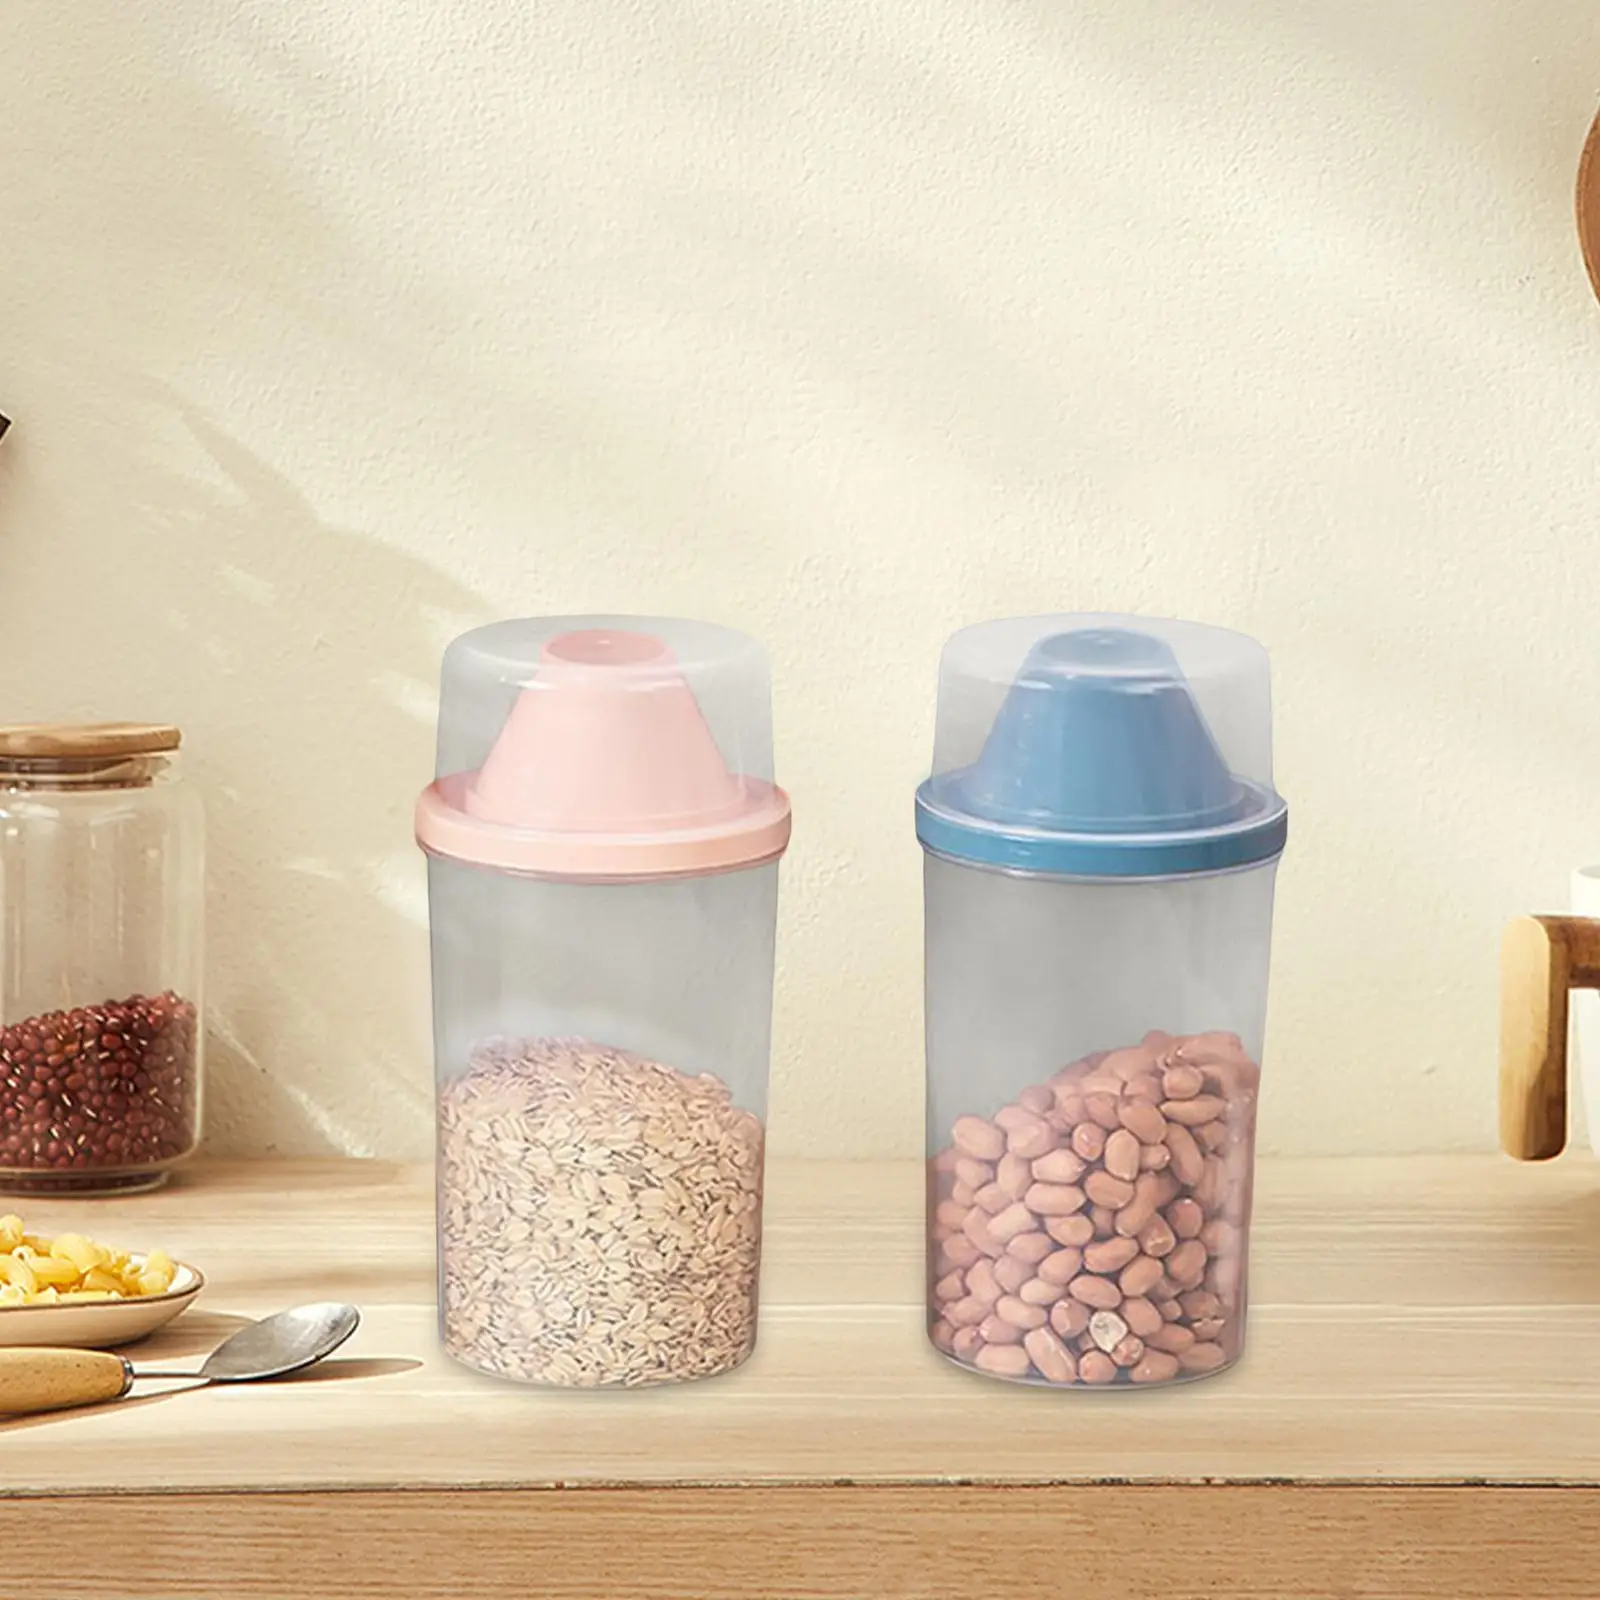 Airtight Food Storage Container Transparent 1000ml with Lid Dispenser Rice Tank for Flour Baking Supplies Beans Sugar Kitchen